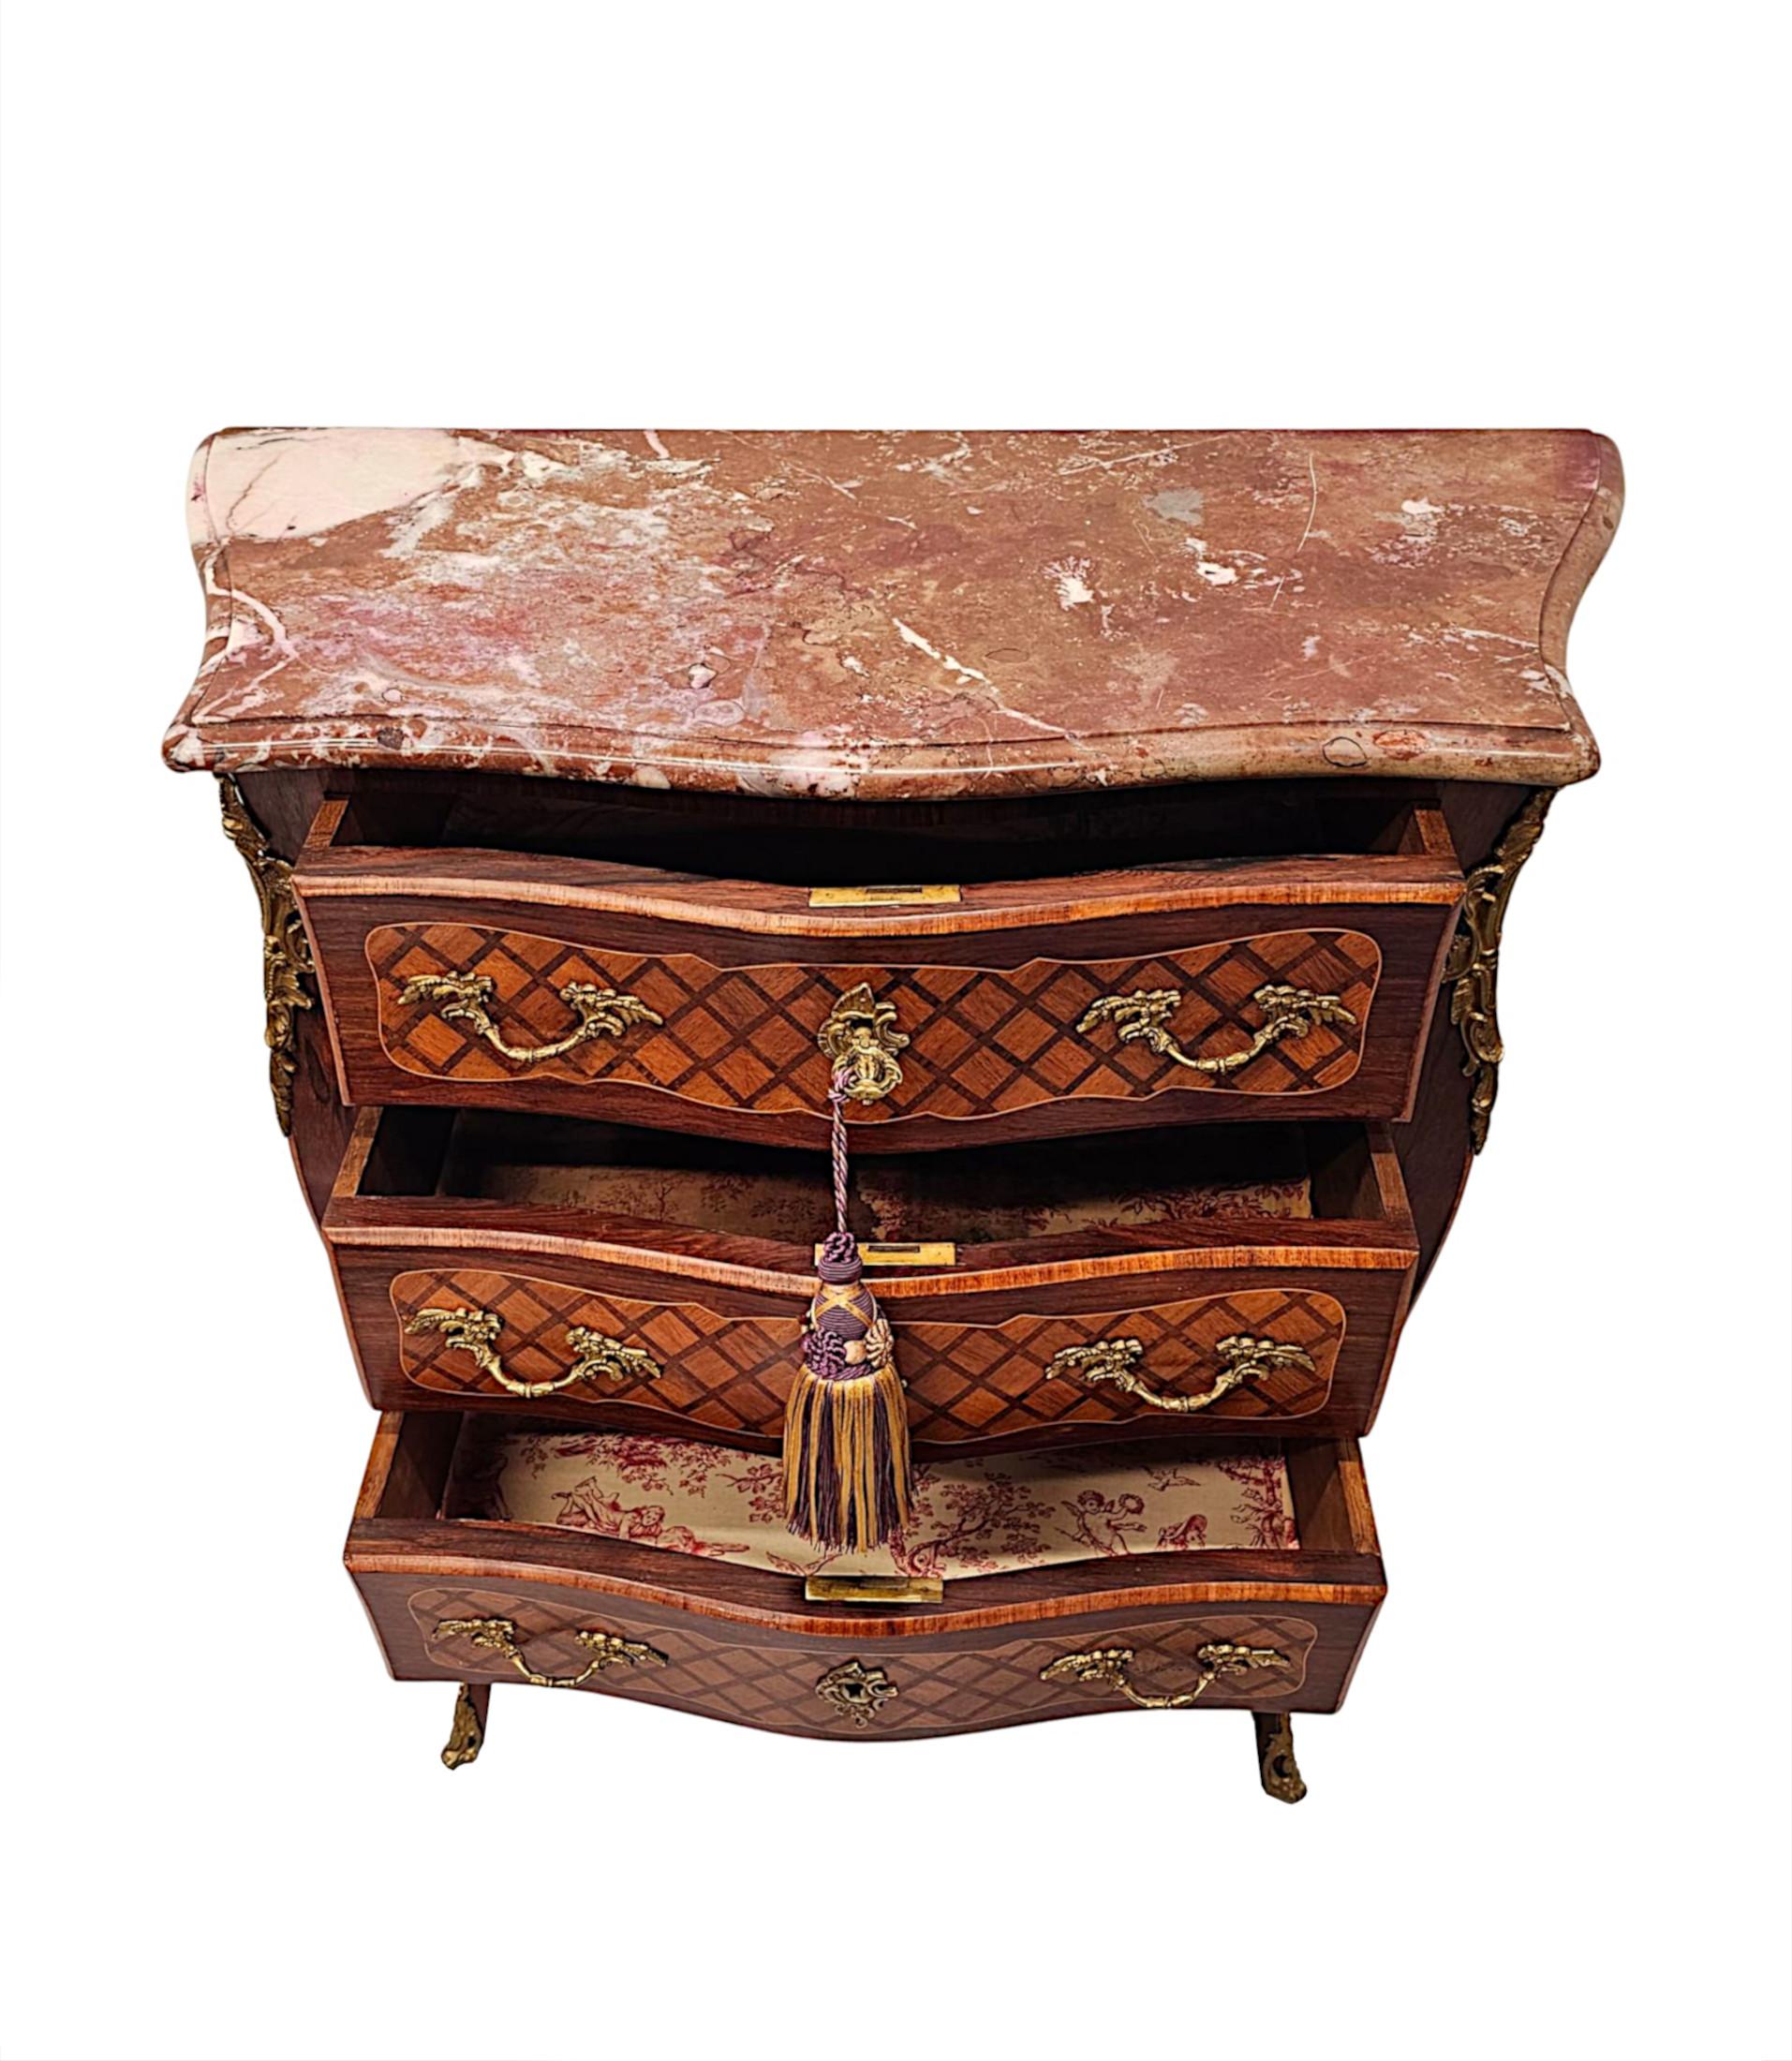 A Very Rare 19th Century Marble Top Inlaid Ormolu Mounted Chest of Drawers For Sale 1